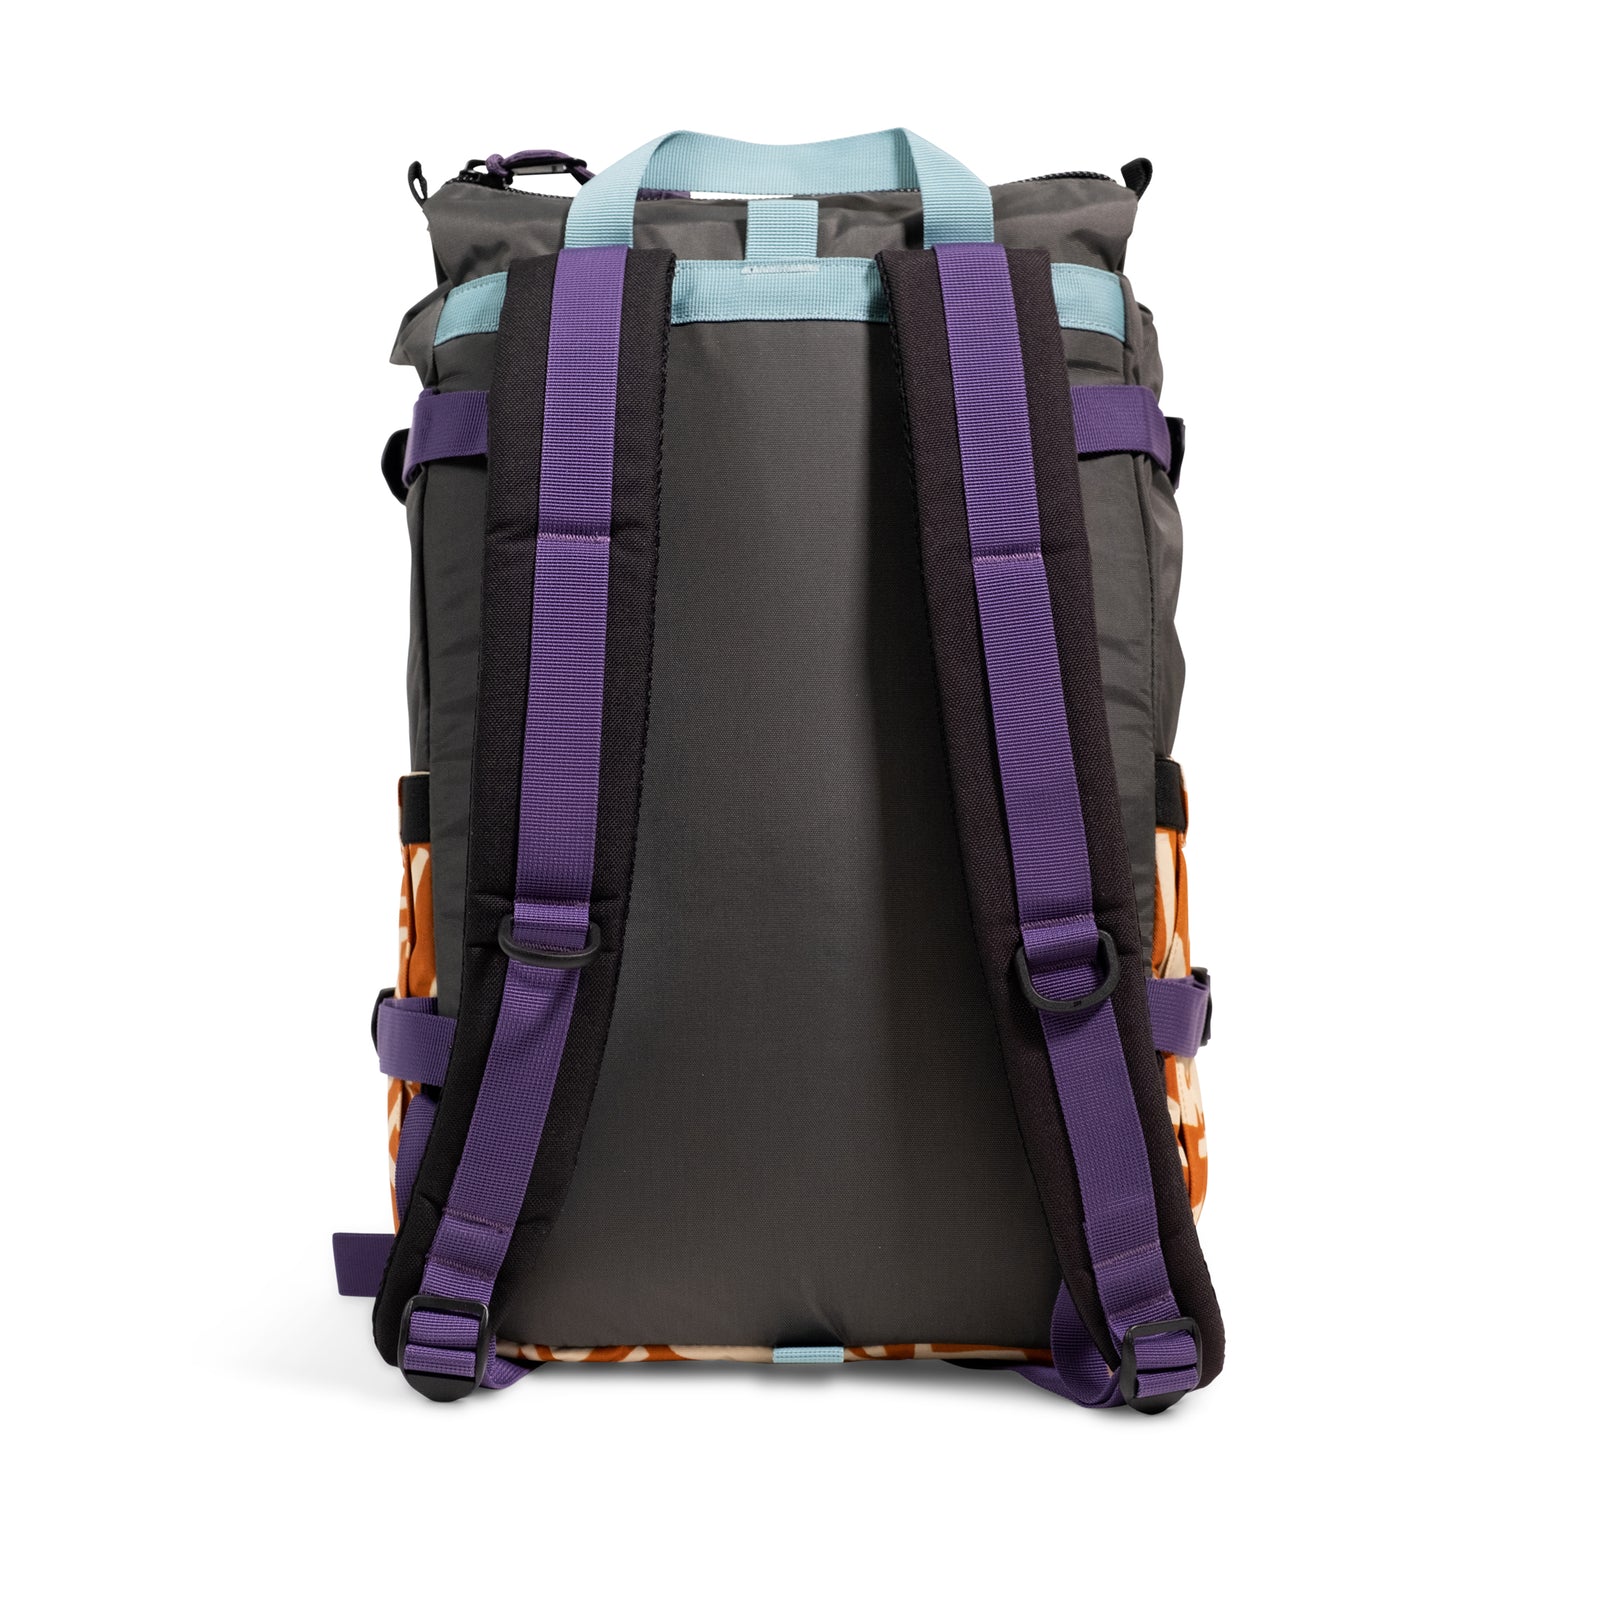 Back View of Topo Designs Rover Pack Classic in "Zion Spice / Asphalt"